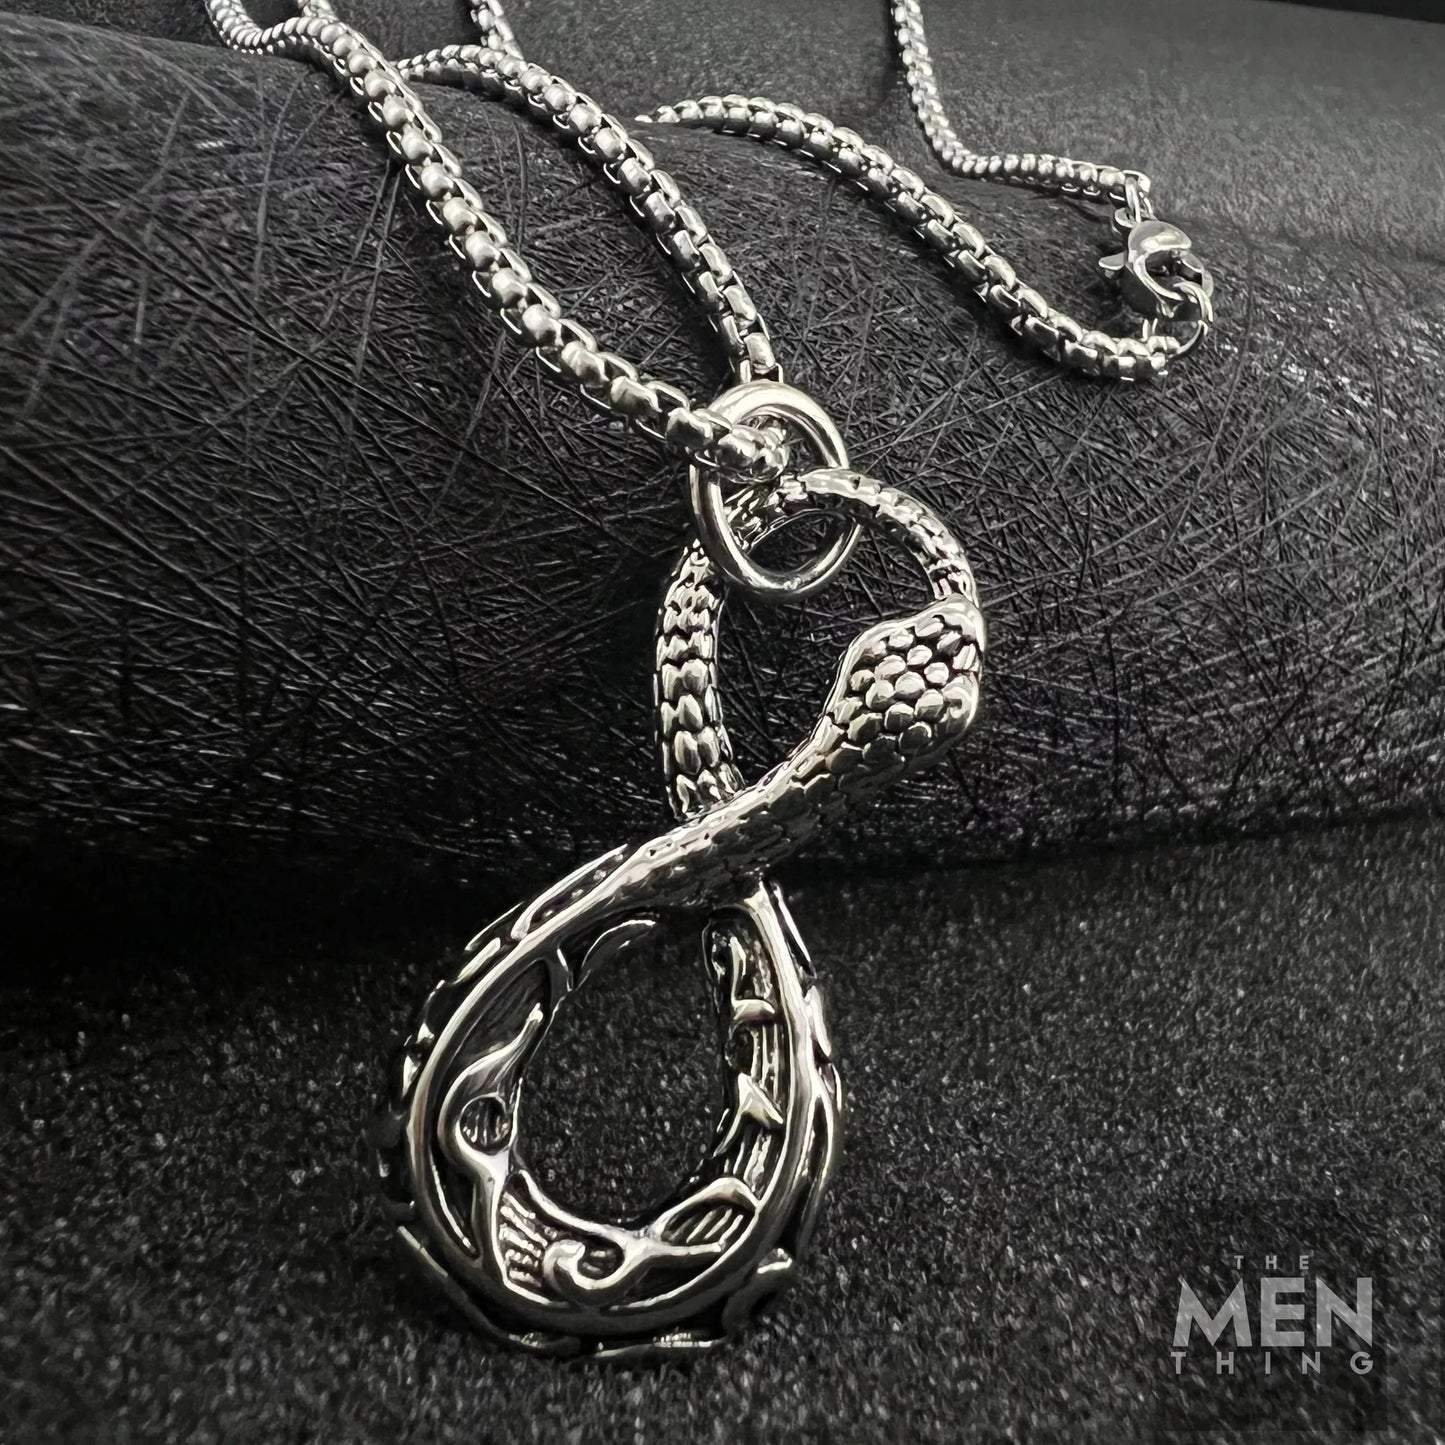 THE MEN THING Alloy Snake 8 Pendant with Pure Stainless Steel 24inch Chain for Men, European trending Style - Round Box Chain & Pendant for Men & Boy